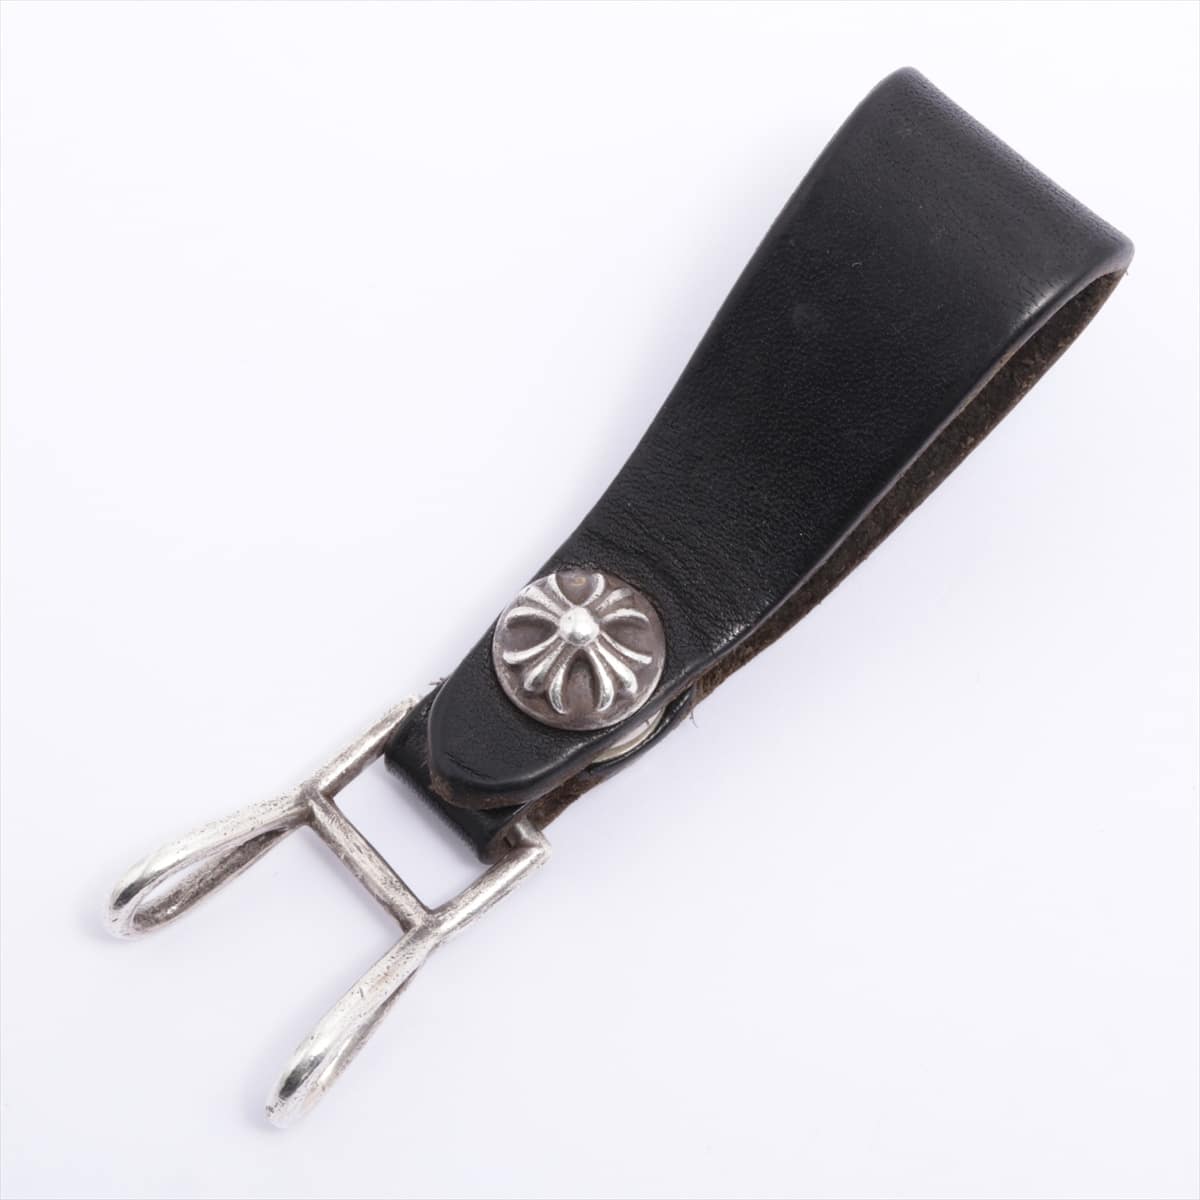 Chrome Hearts W belt loop Keyring Leather & 925 21.2g Cross button